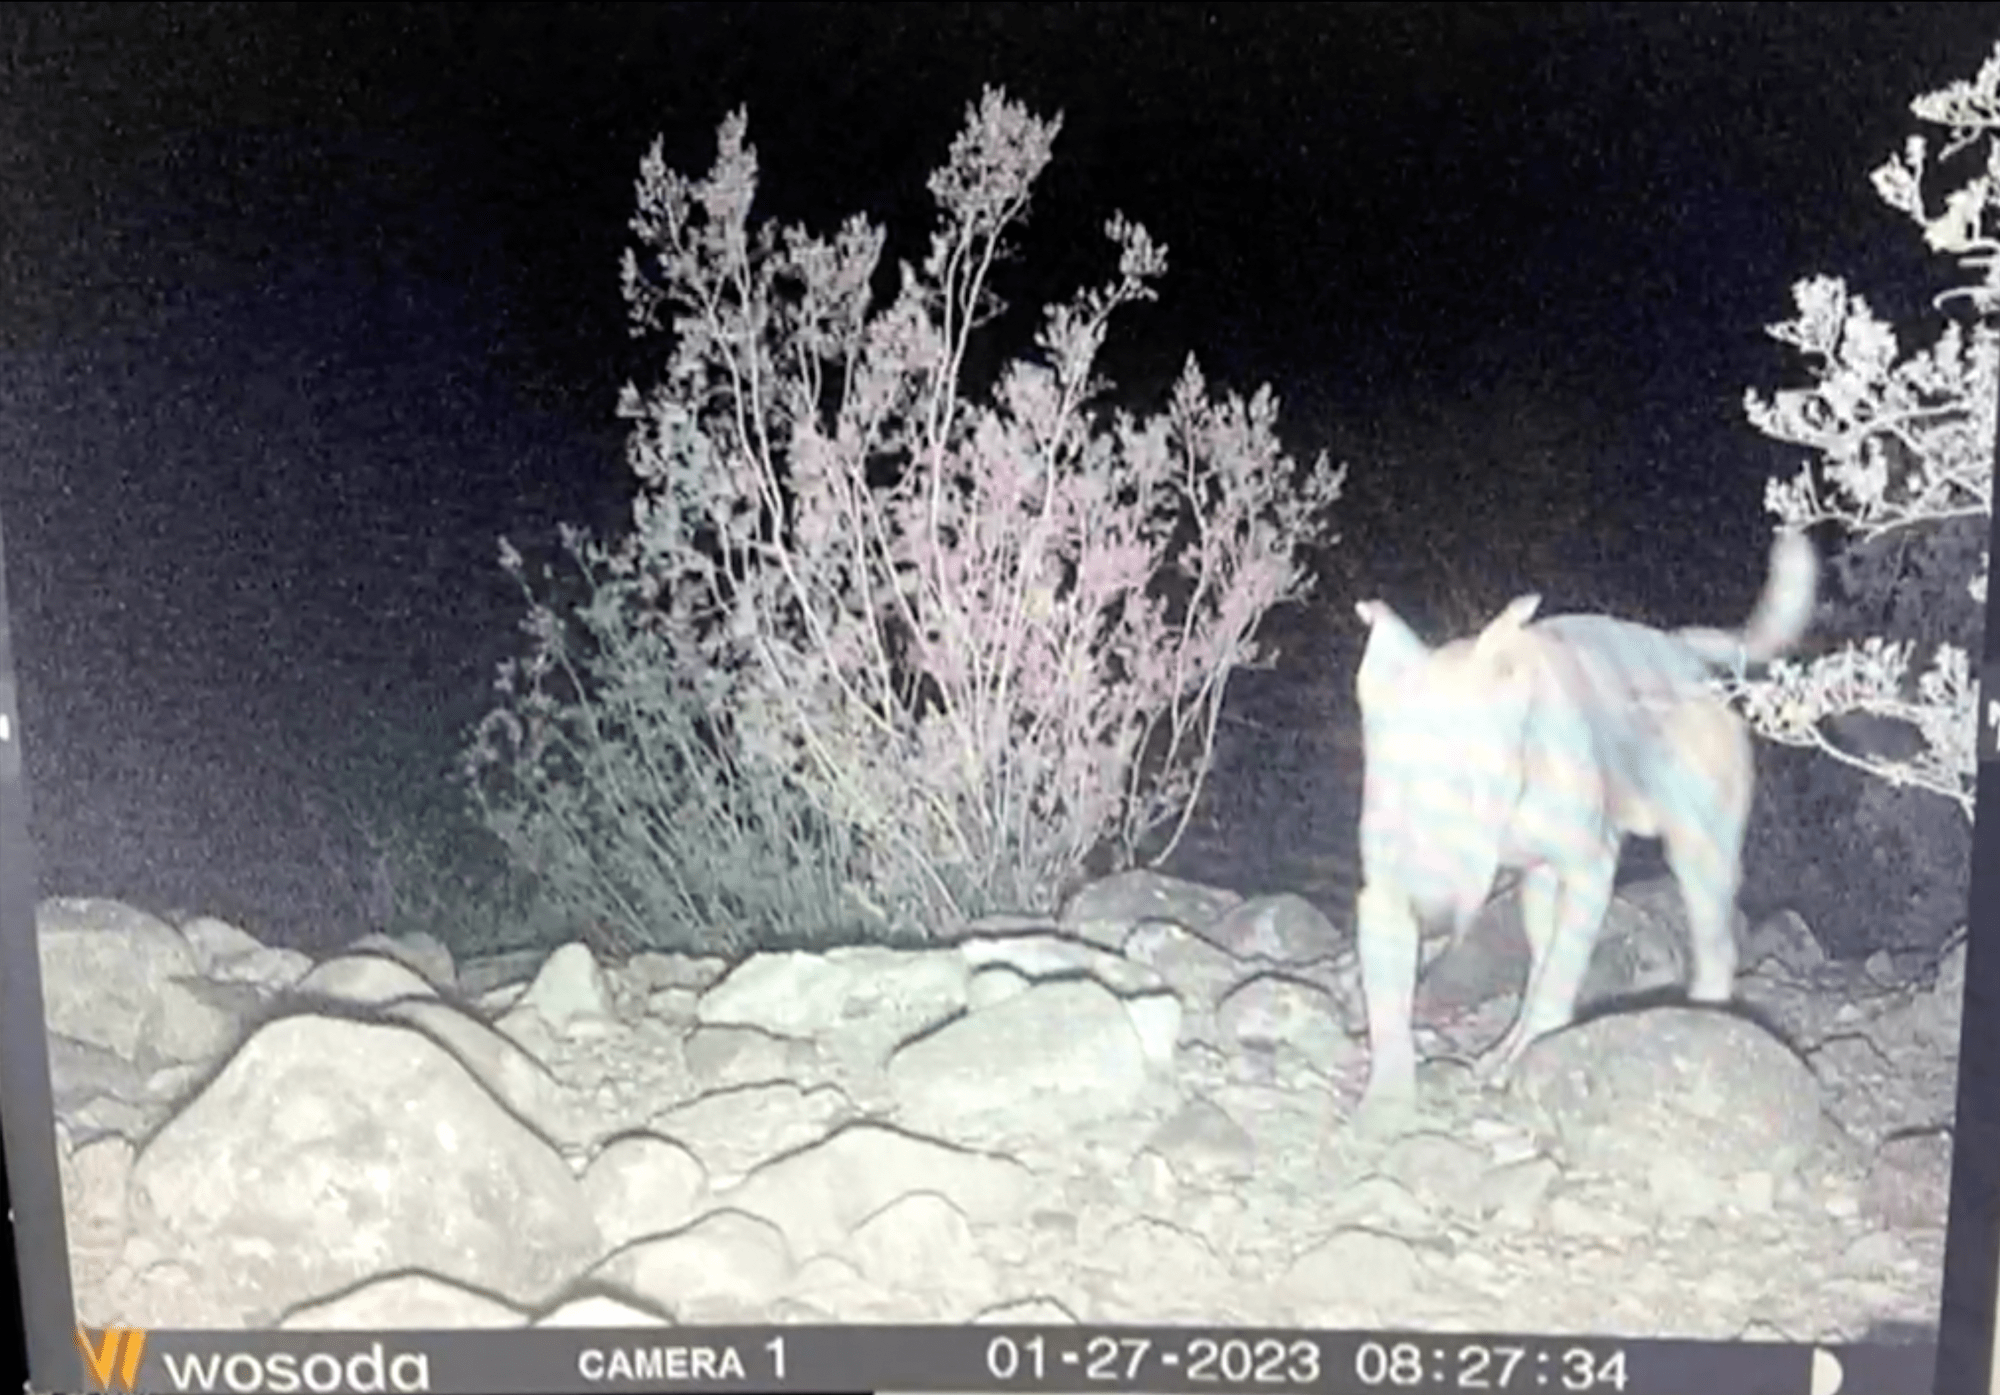 When Coyotes and Dogs Mix: Wild Coyotes Adopt Stray Dog in Nevada Desert